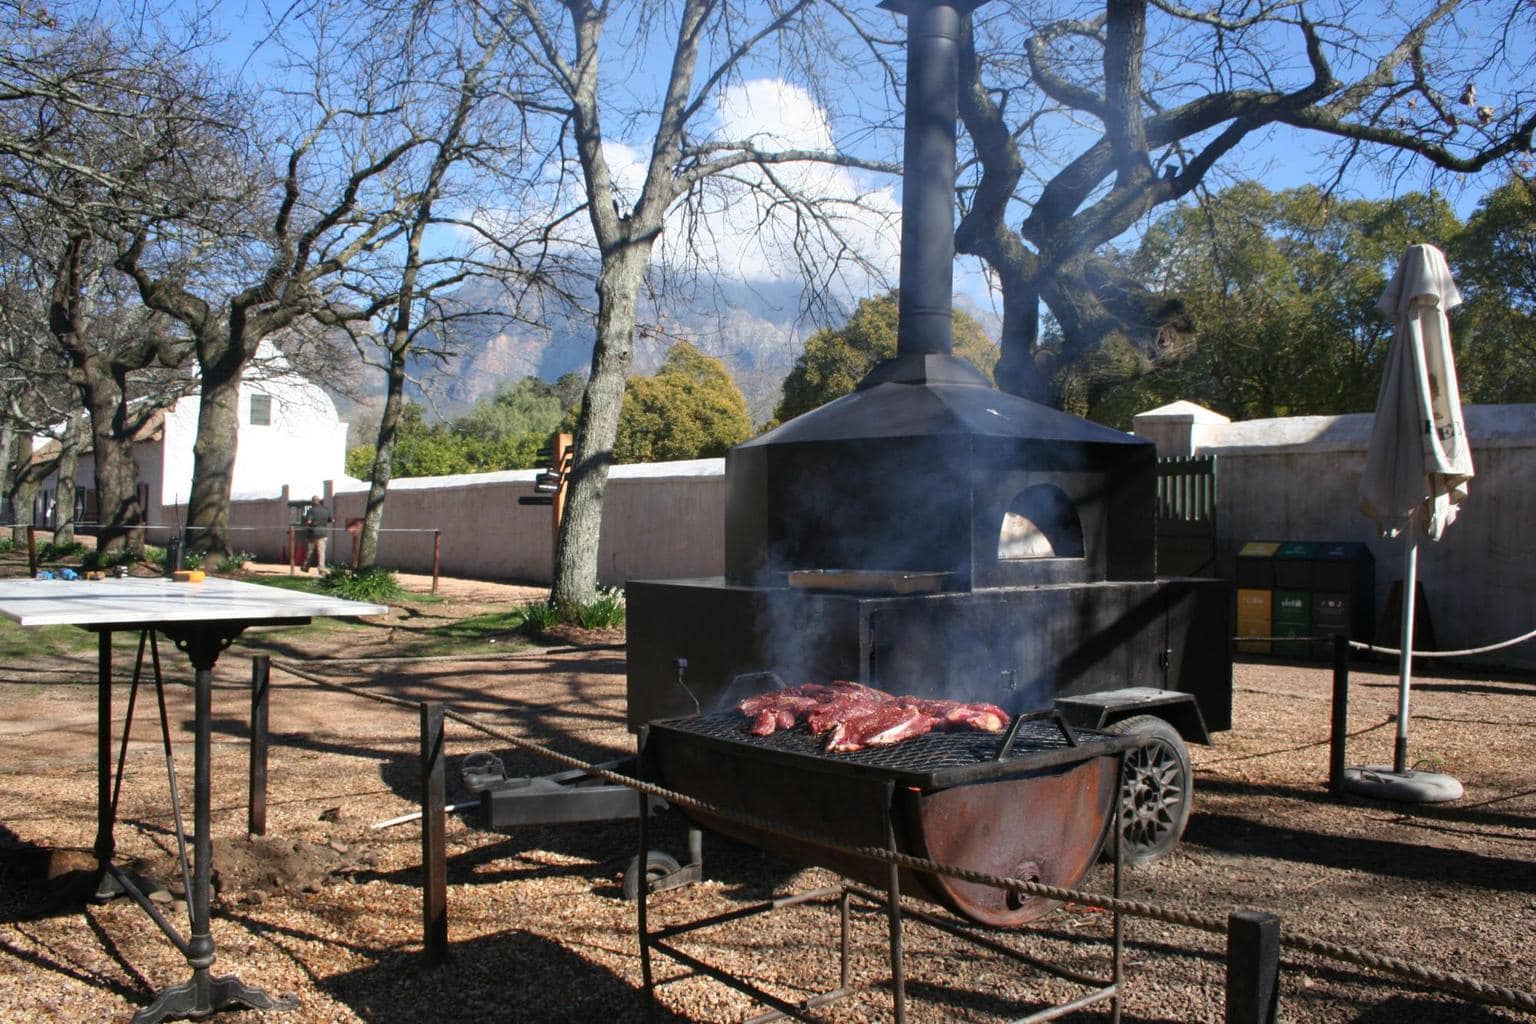 A braai out in the open